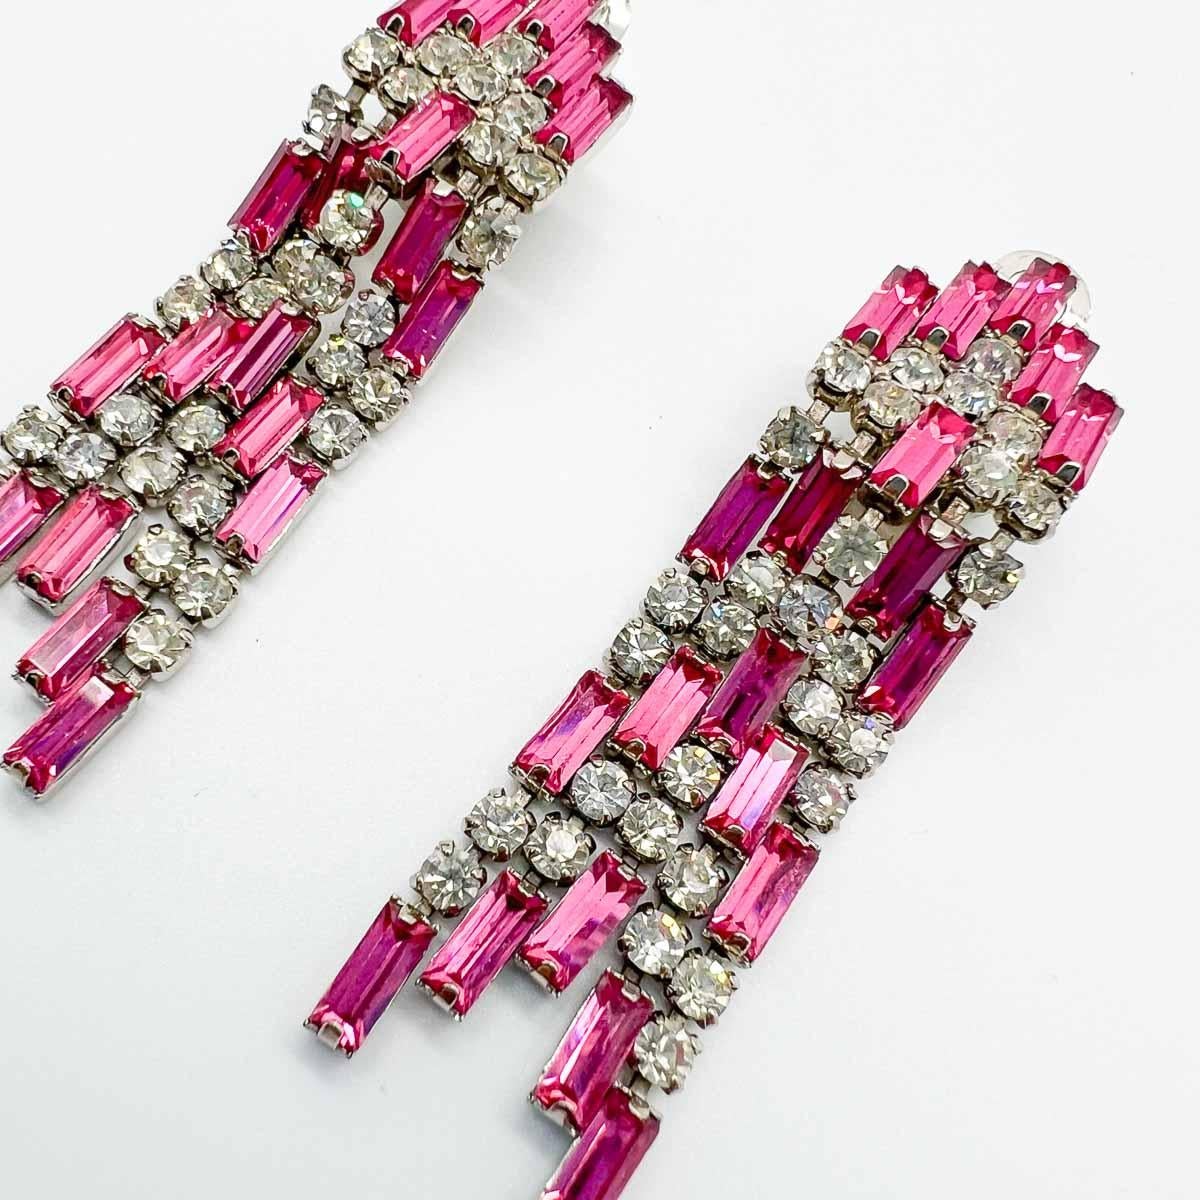 Vintage Art Deco Inspired Pink Baguette Drop Earrings 1950s In Good Condition For Sale In Wilmslow, GB